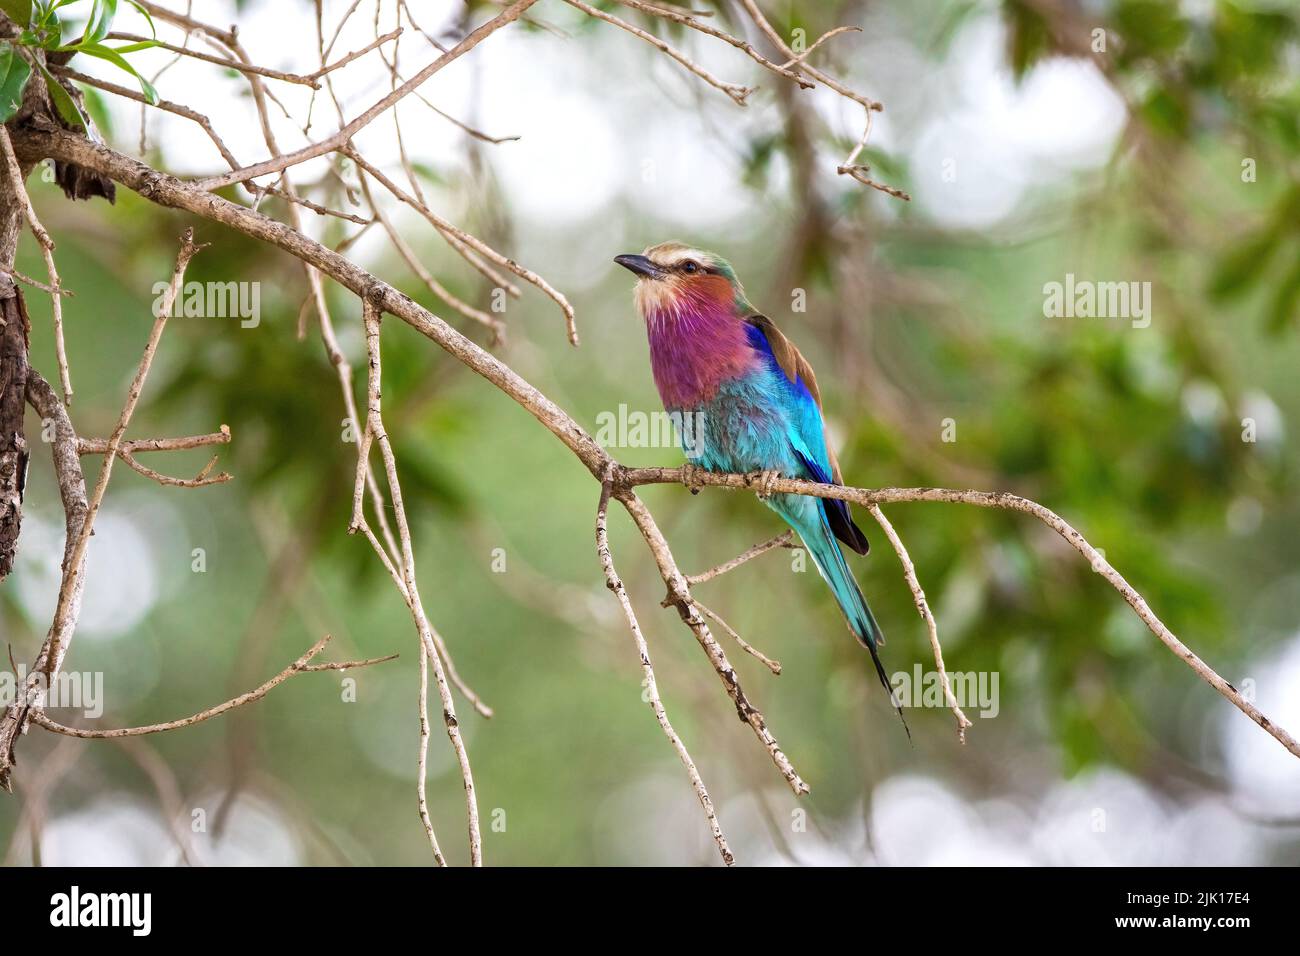 Lilac-breasted roller, coracias caudatus, perched in a tree in the Masai Mara, Kenya. Soft green foliage background. Stock Photo